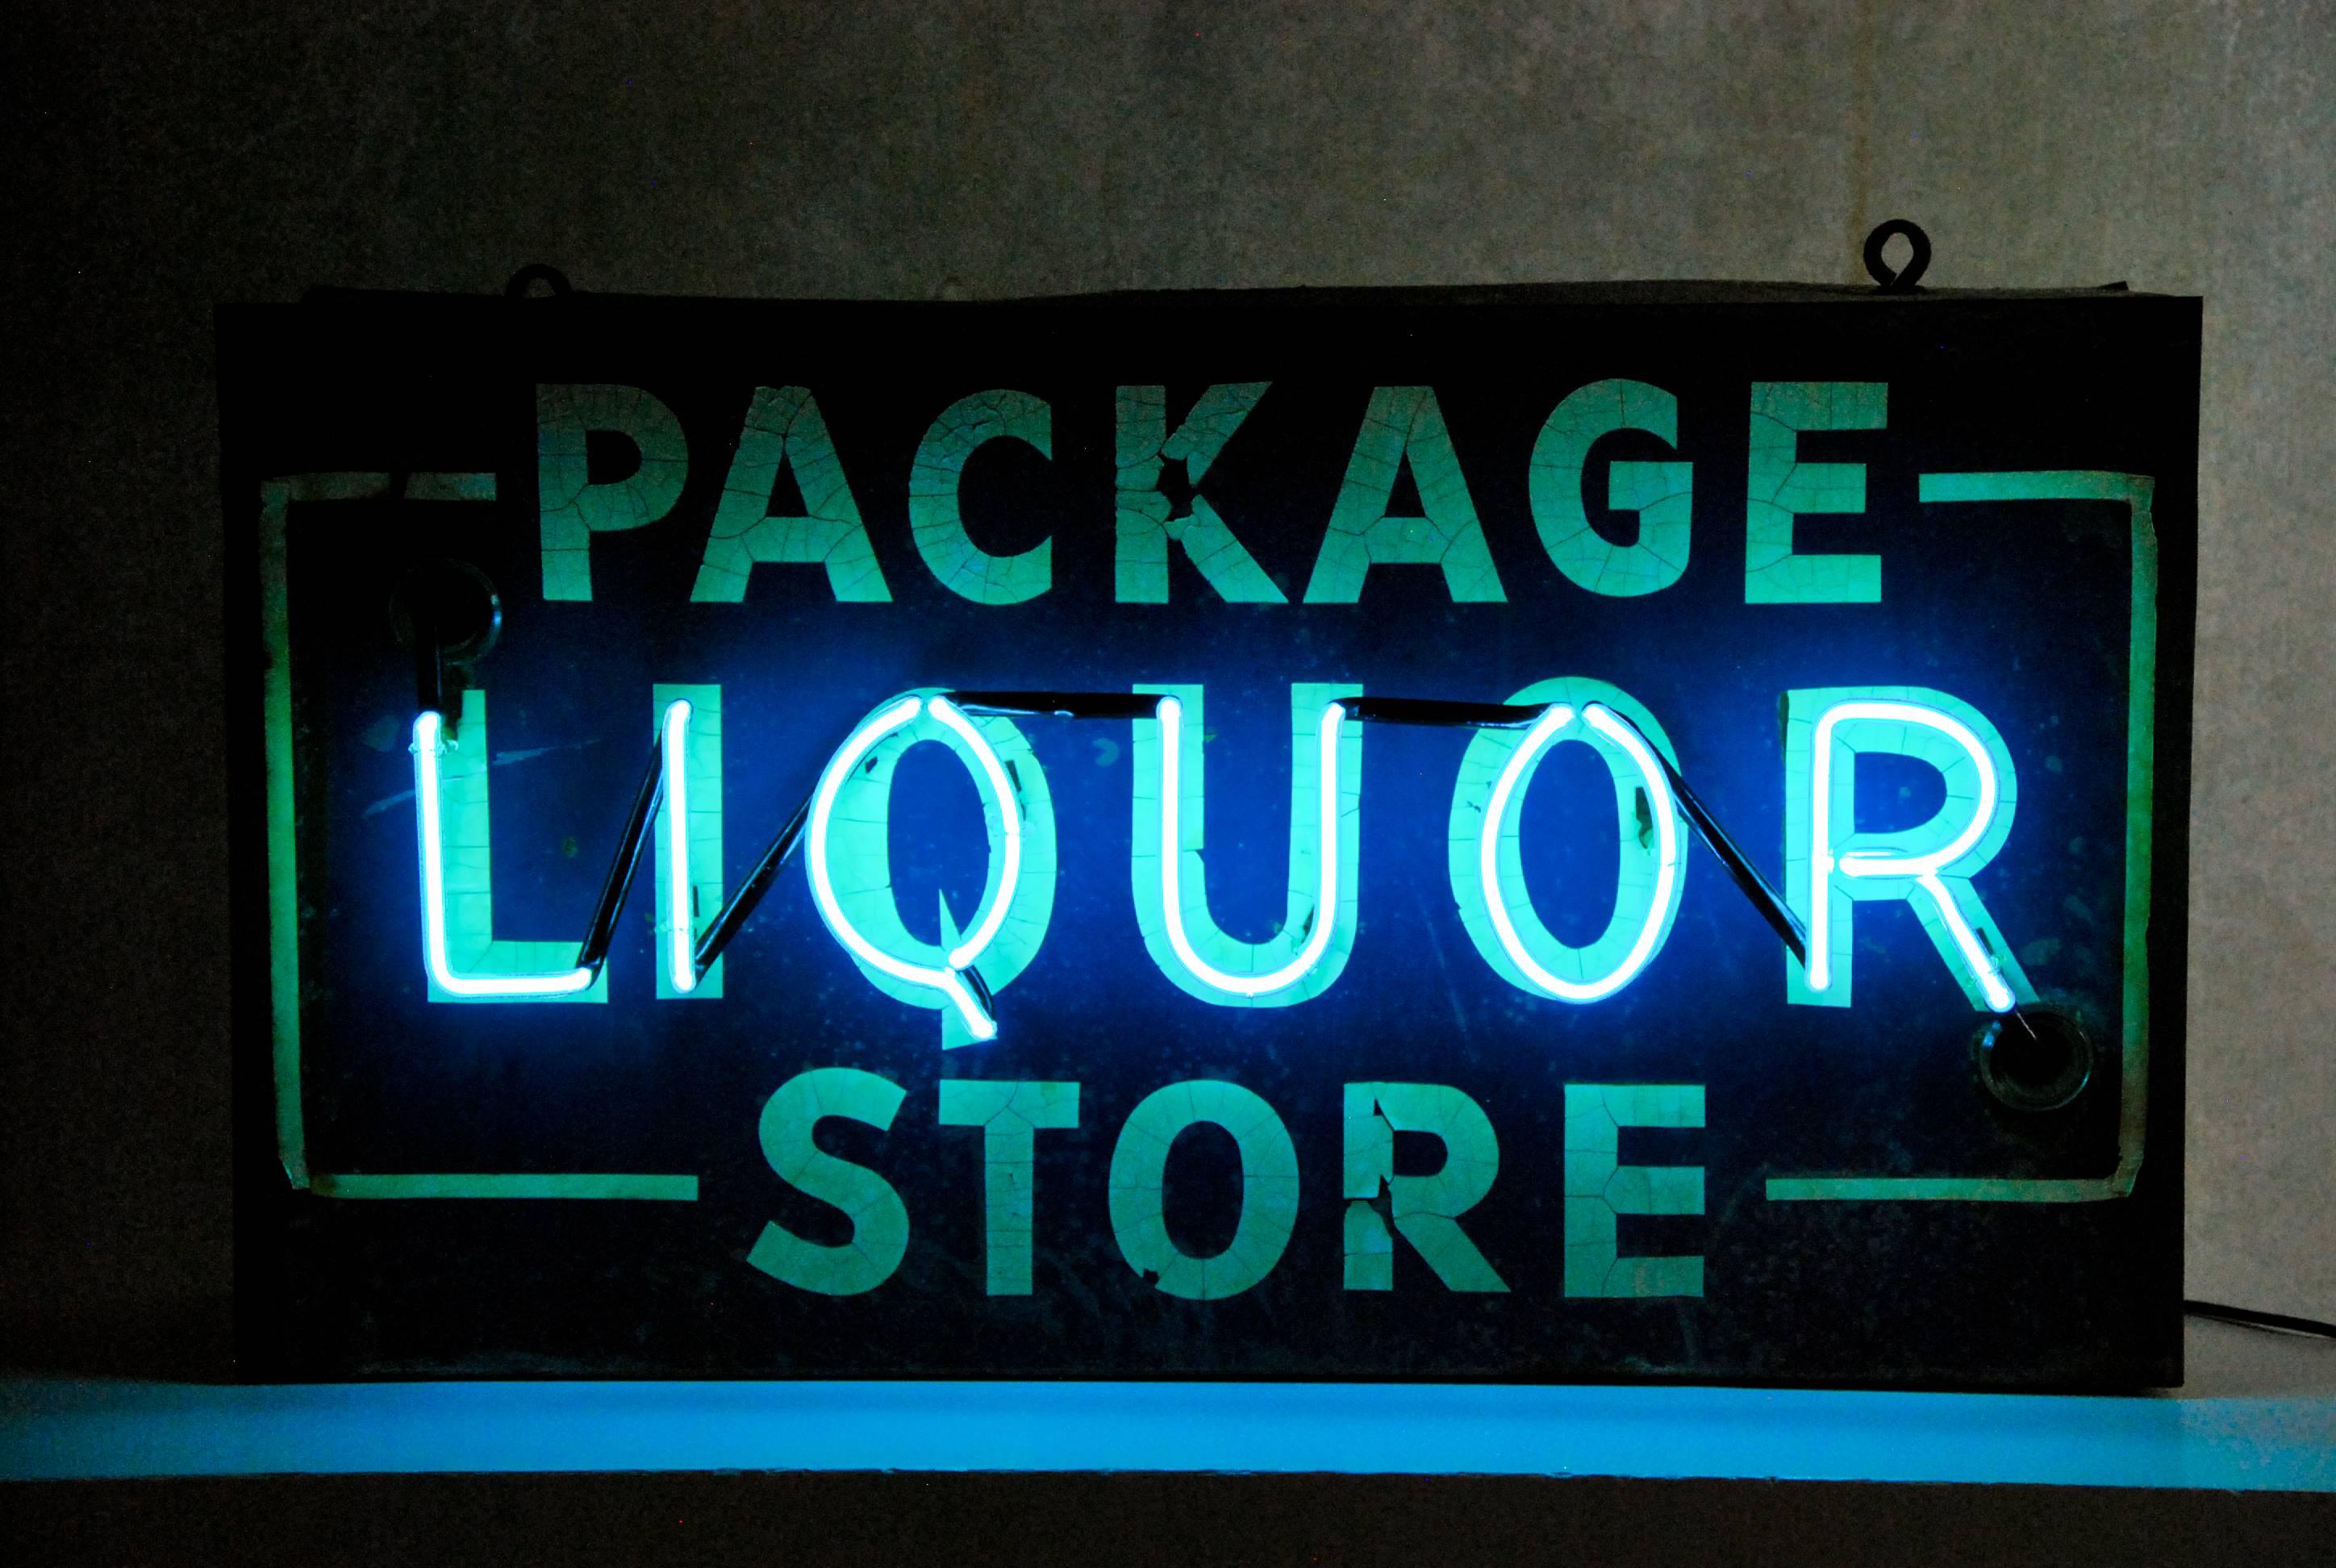 Original to sided neon sign showing the package Liquor store.
Rewired and neon redone. Beautiful small working neon sign.

In various parts of the country, retail stores that sell liquor are called by all sorts of different names. When they need